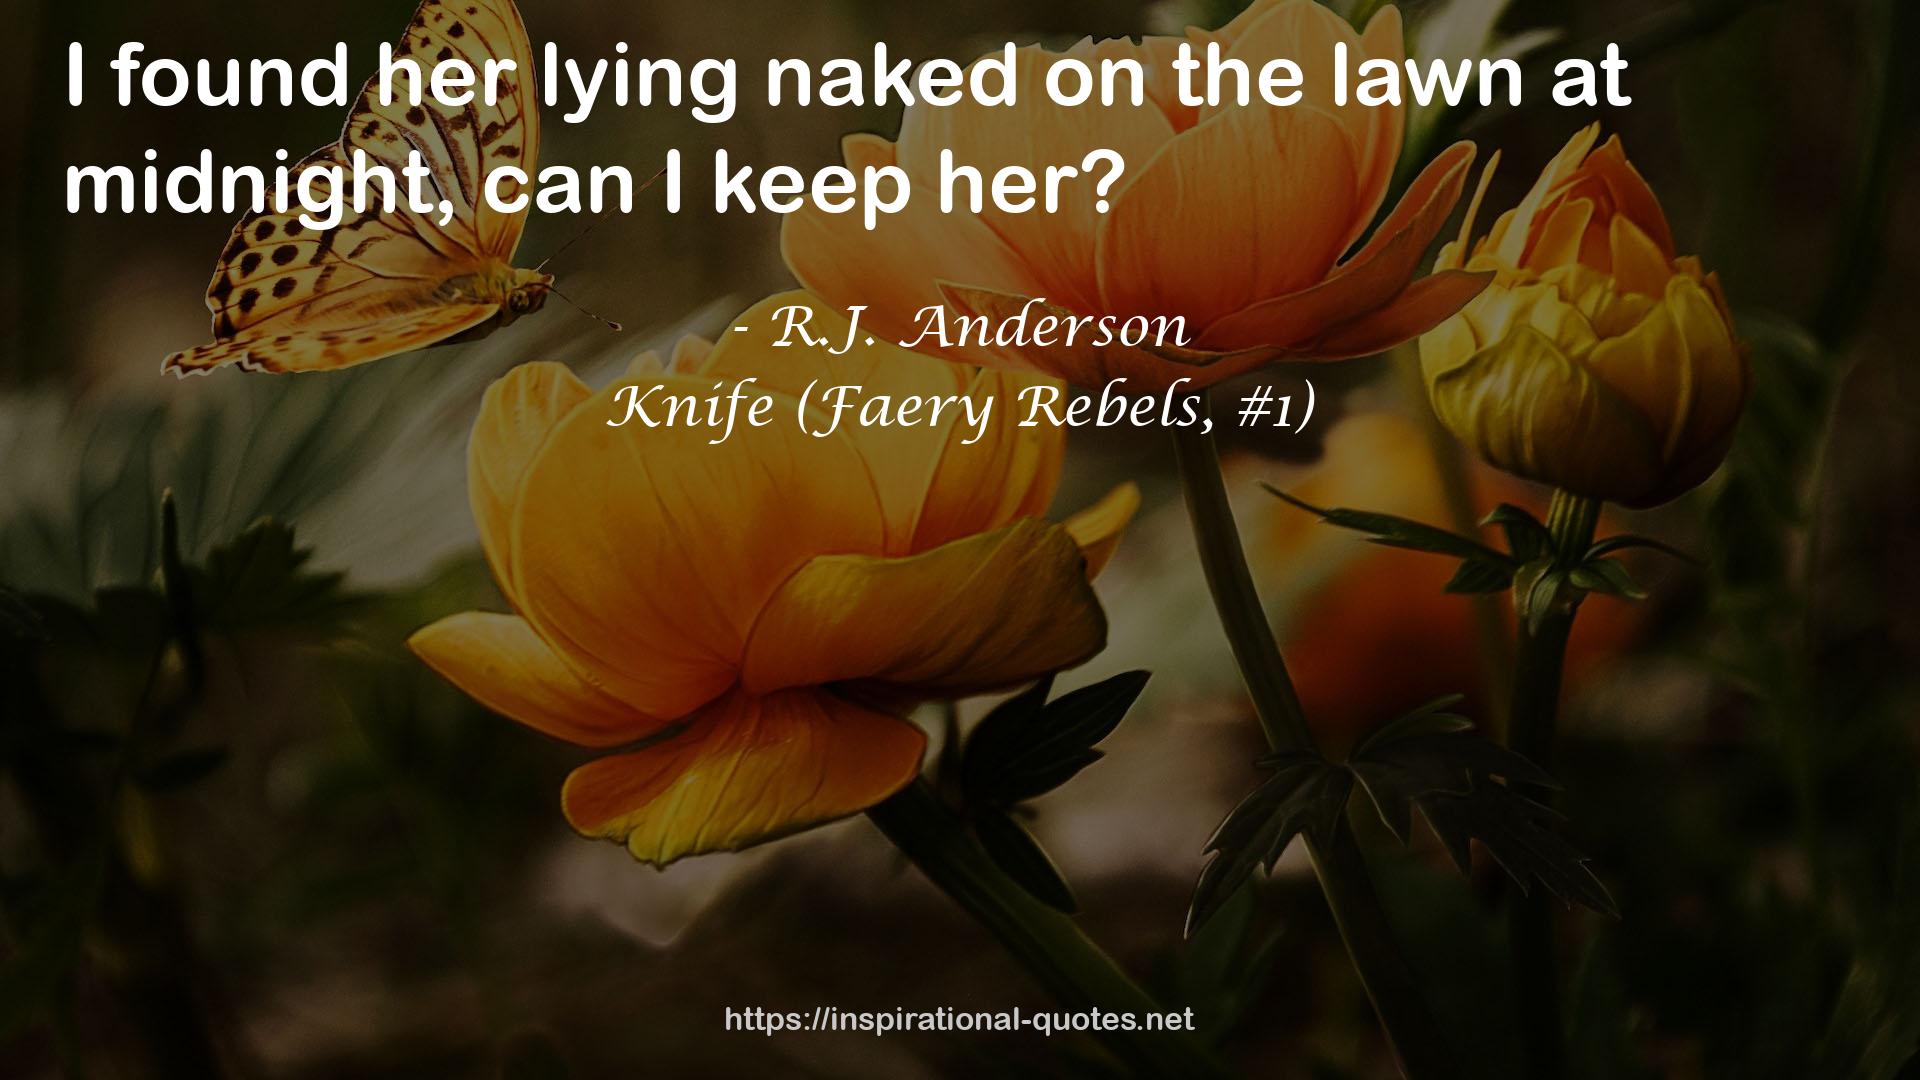 Knife (Faery Rebels, #1) QUOTES